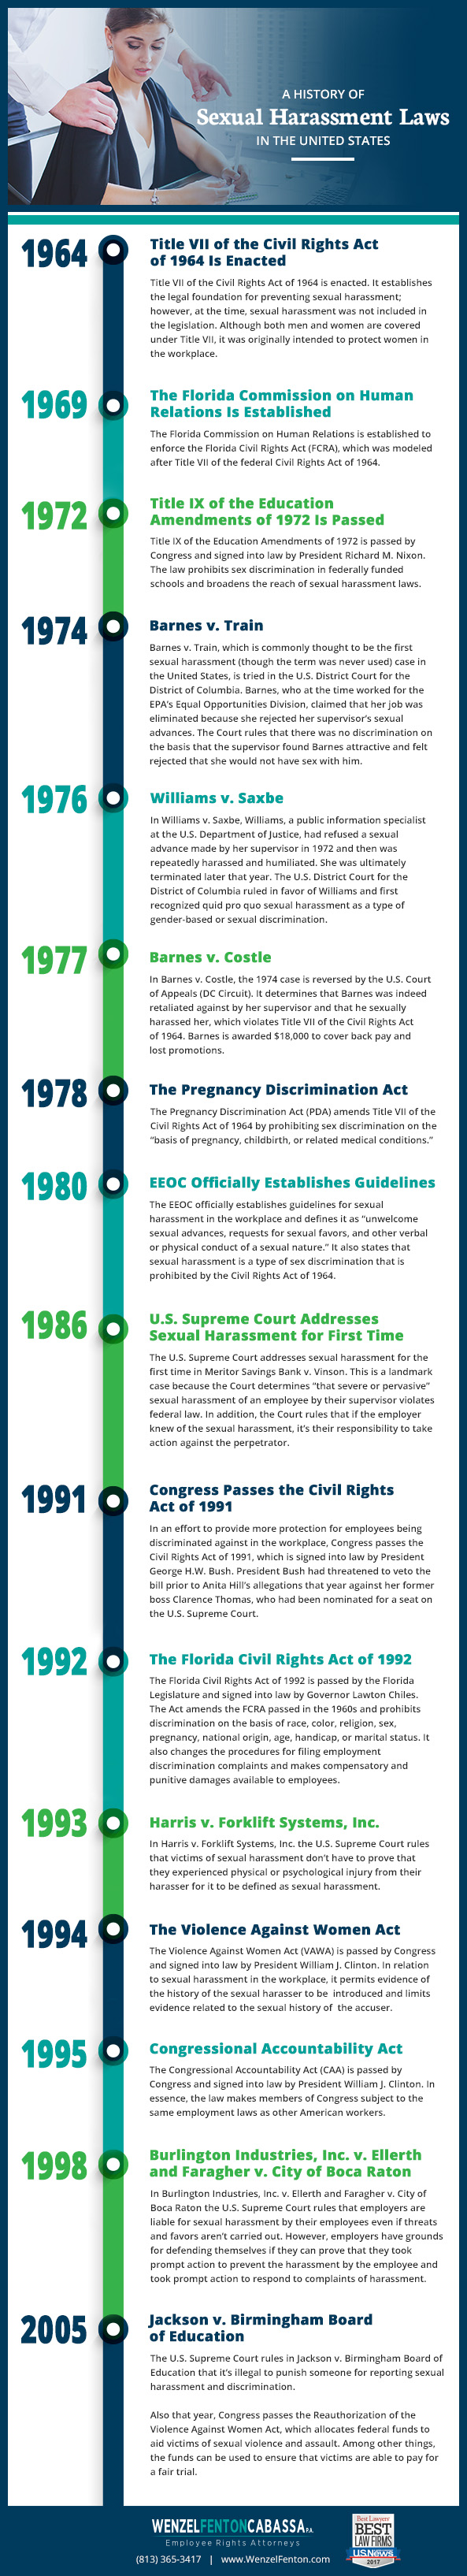 A History Of Sexual harassment laws in the US Infographic